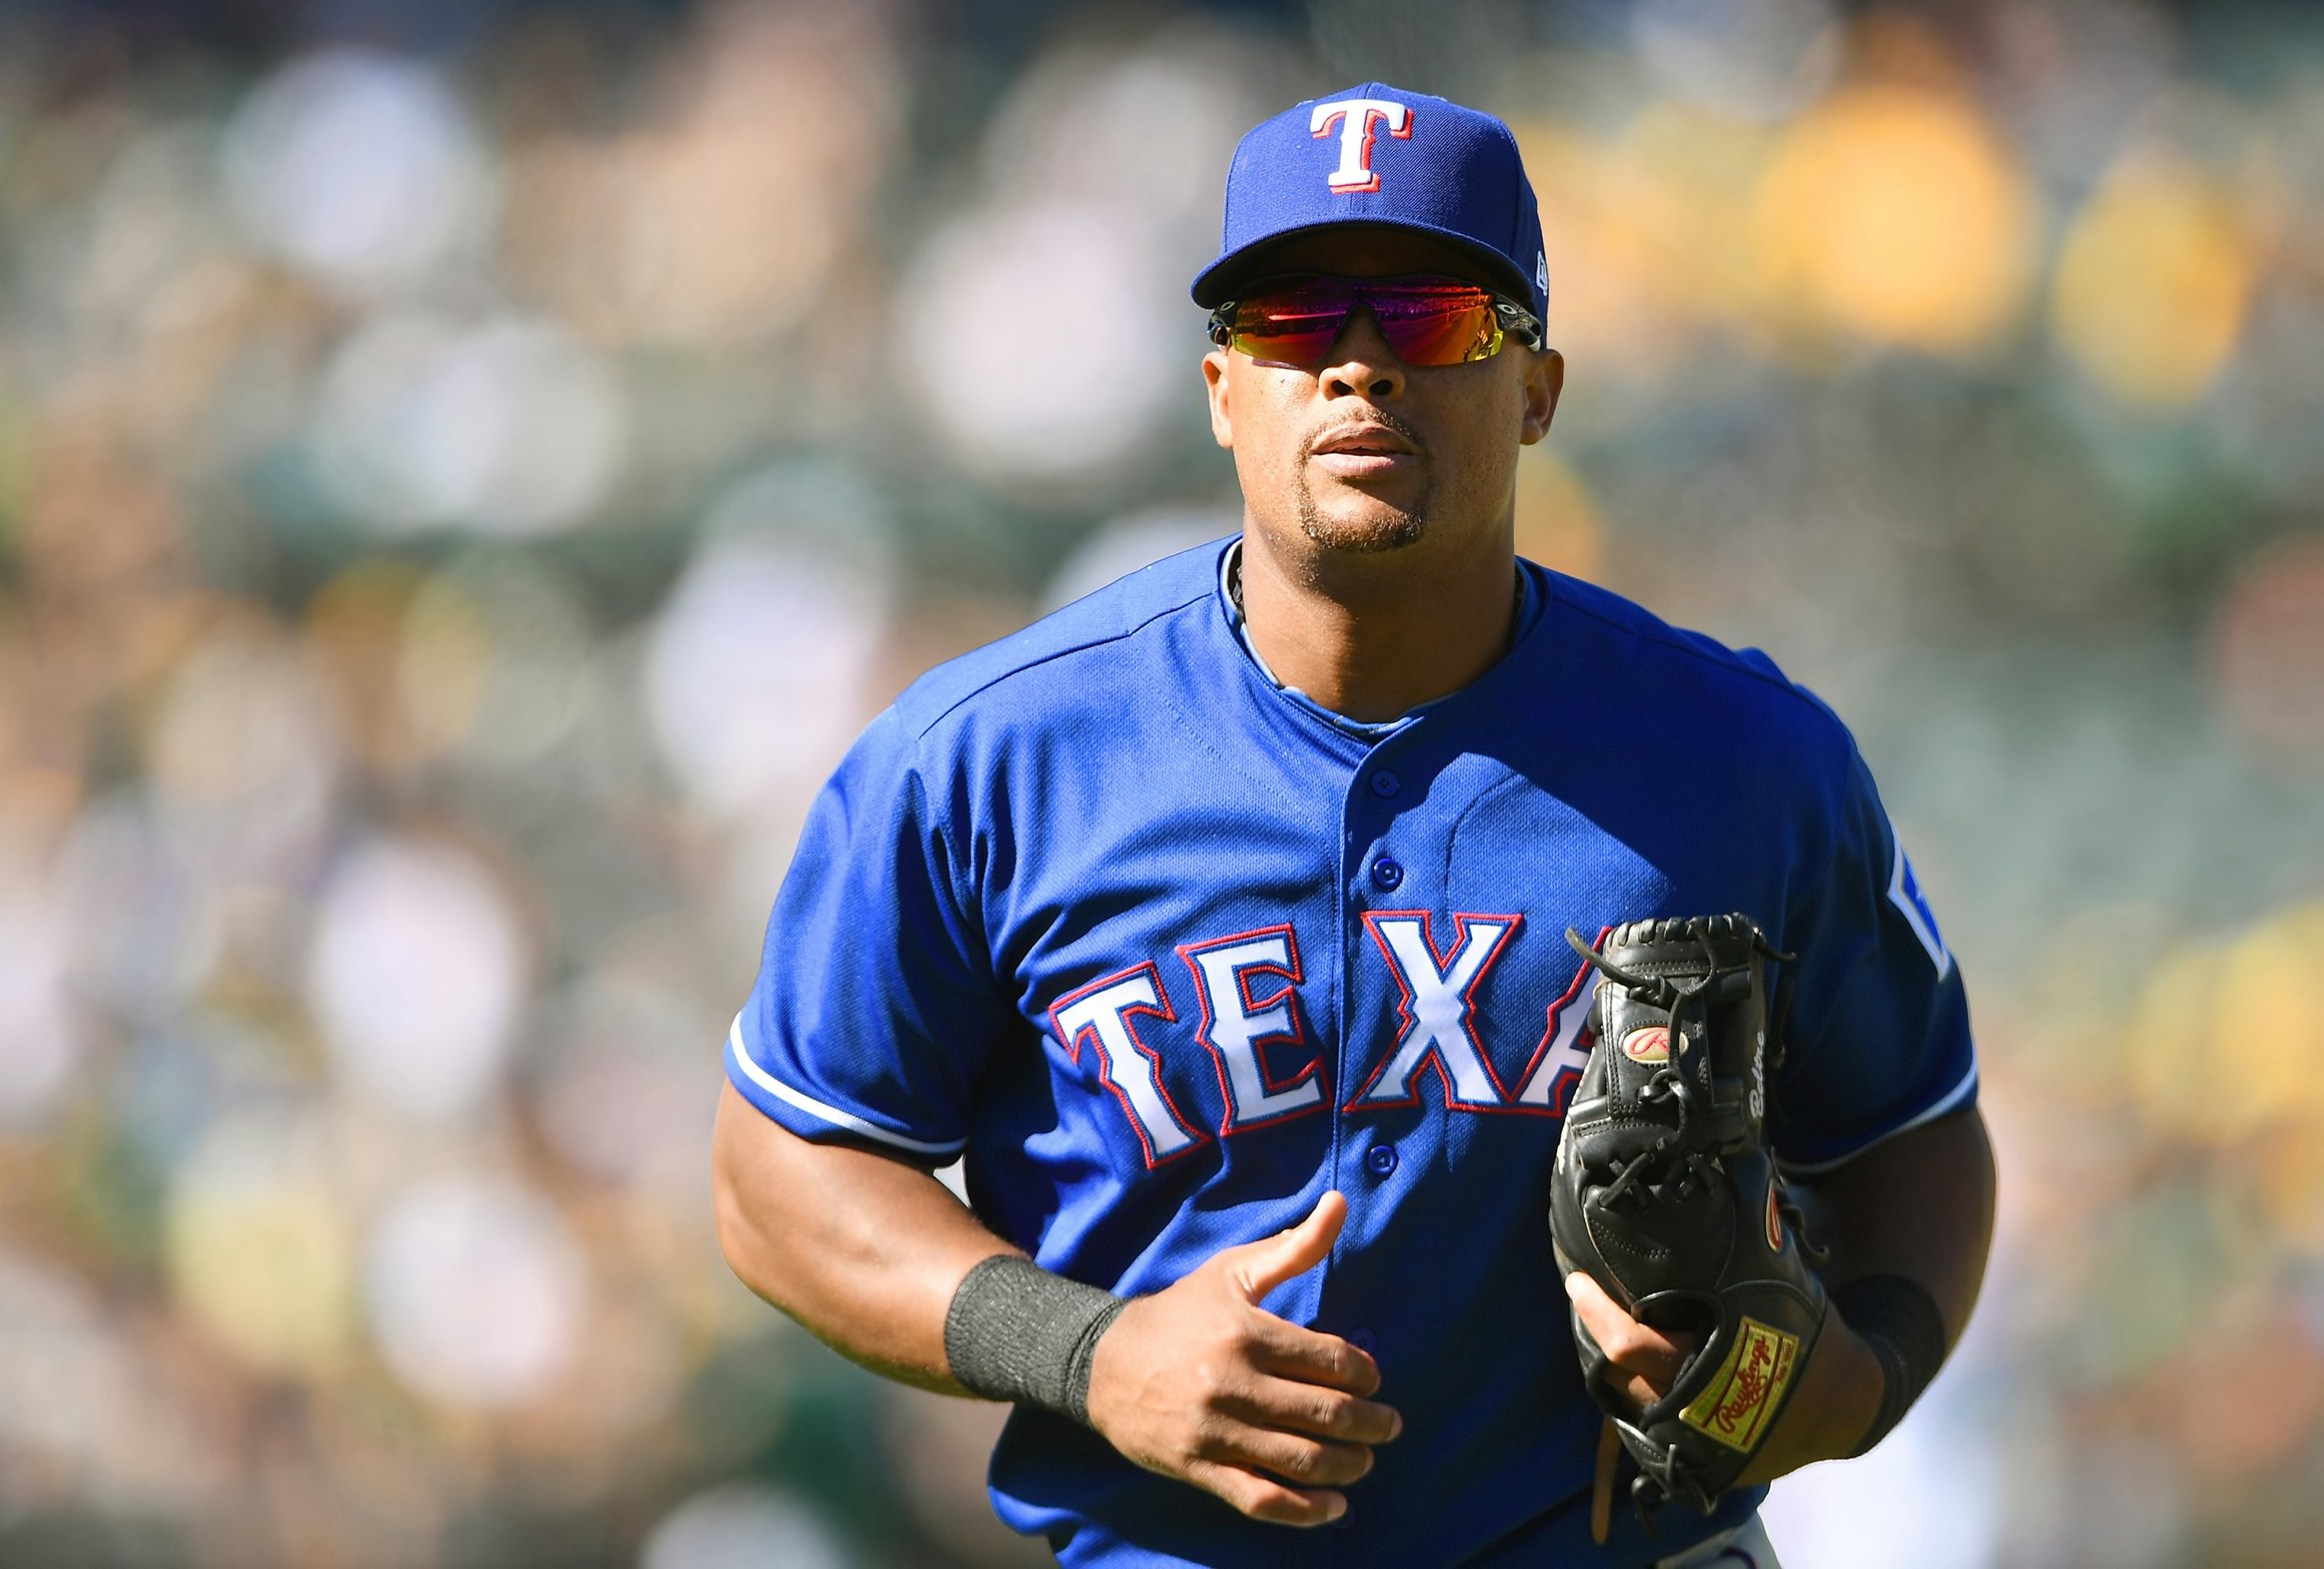 Texas Rangers Alltime Top10 free agent signings Page 8